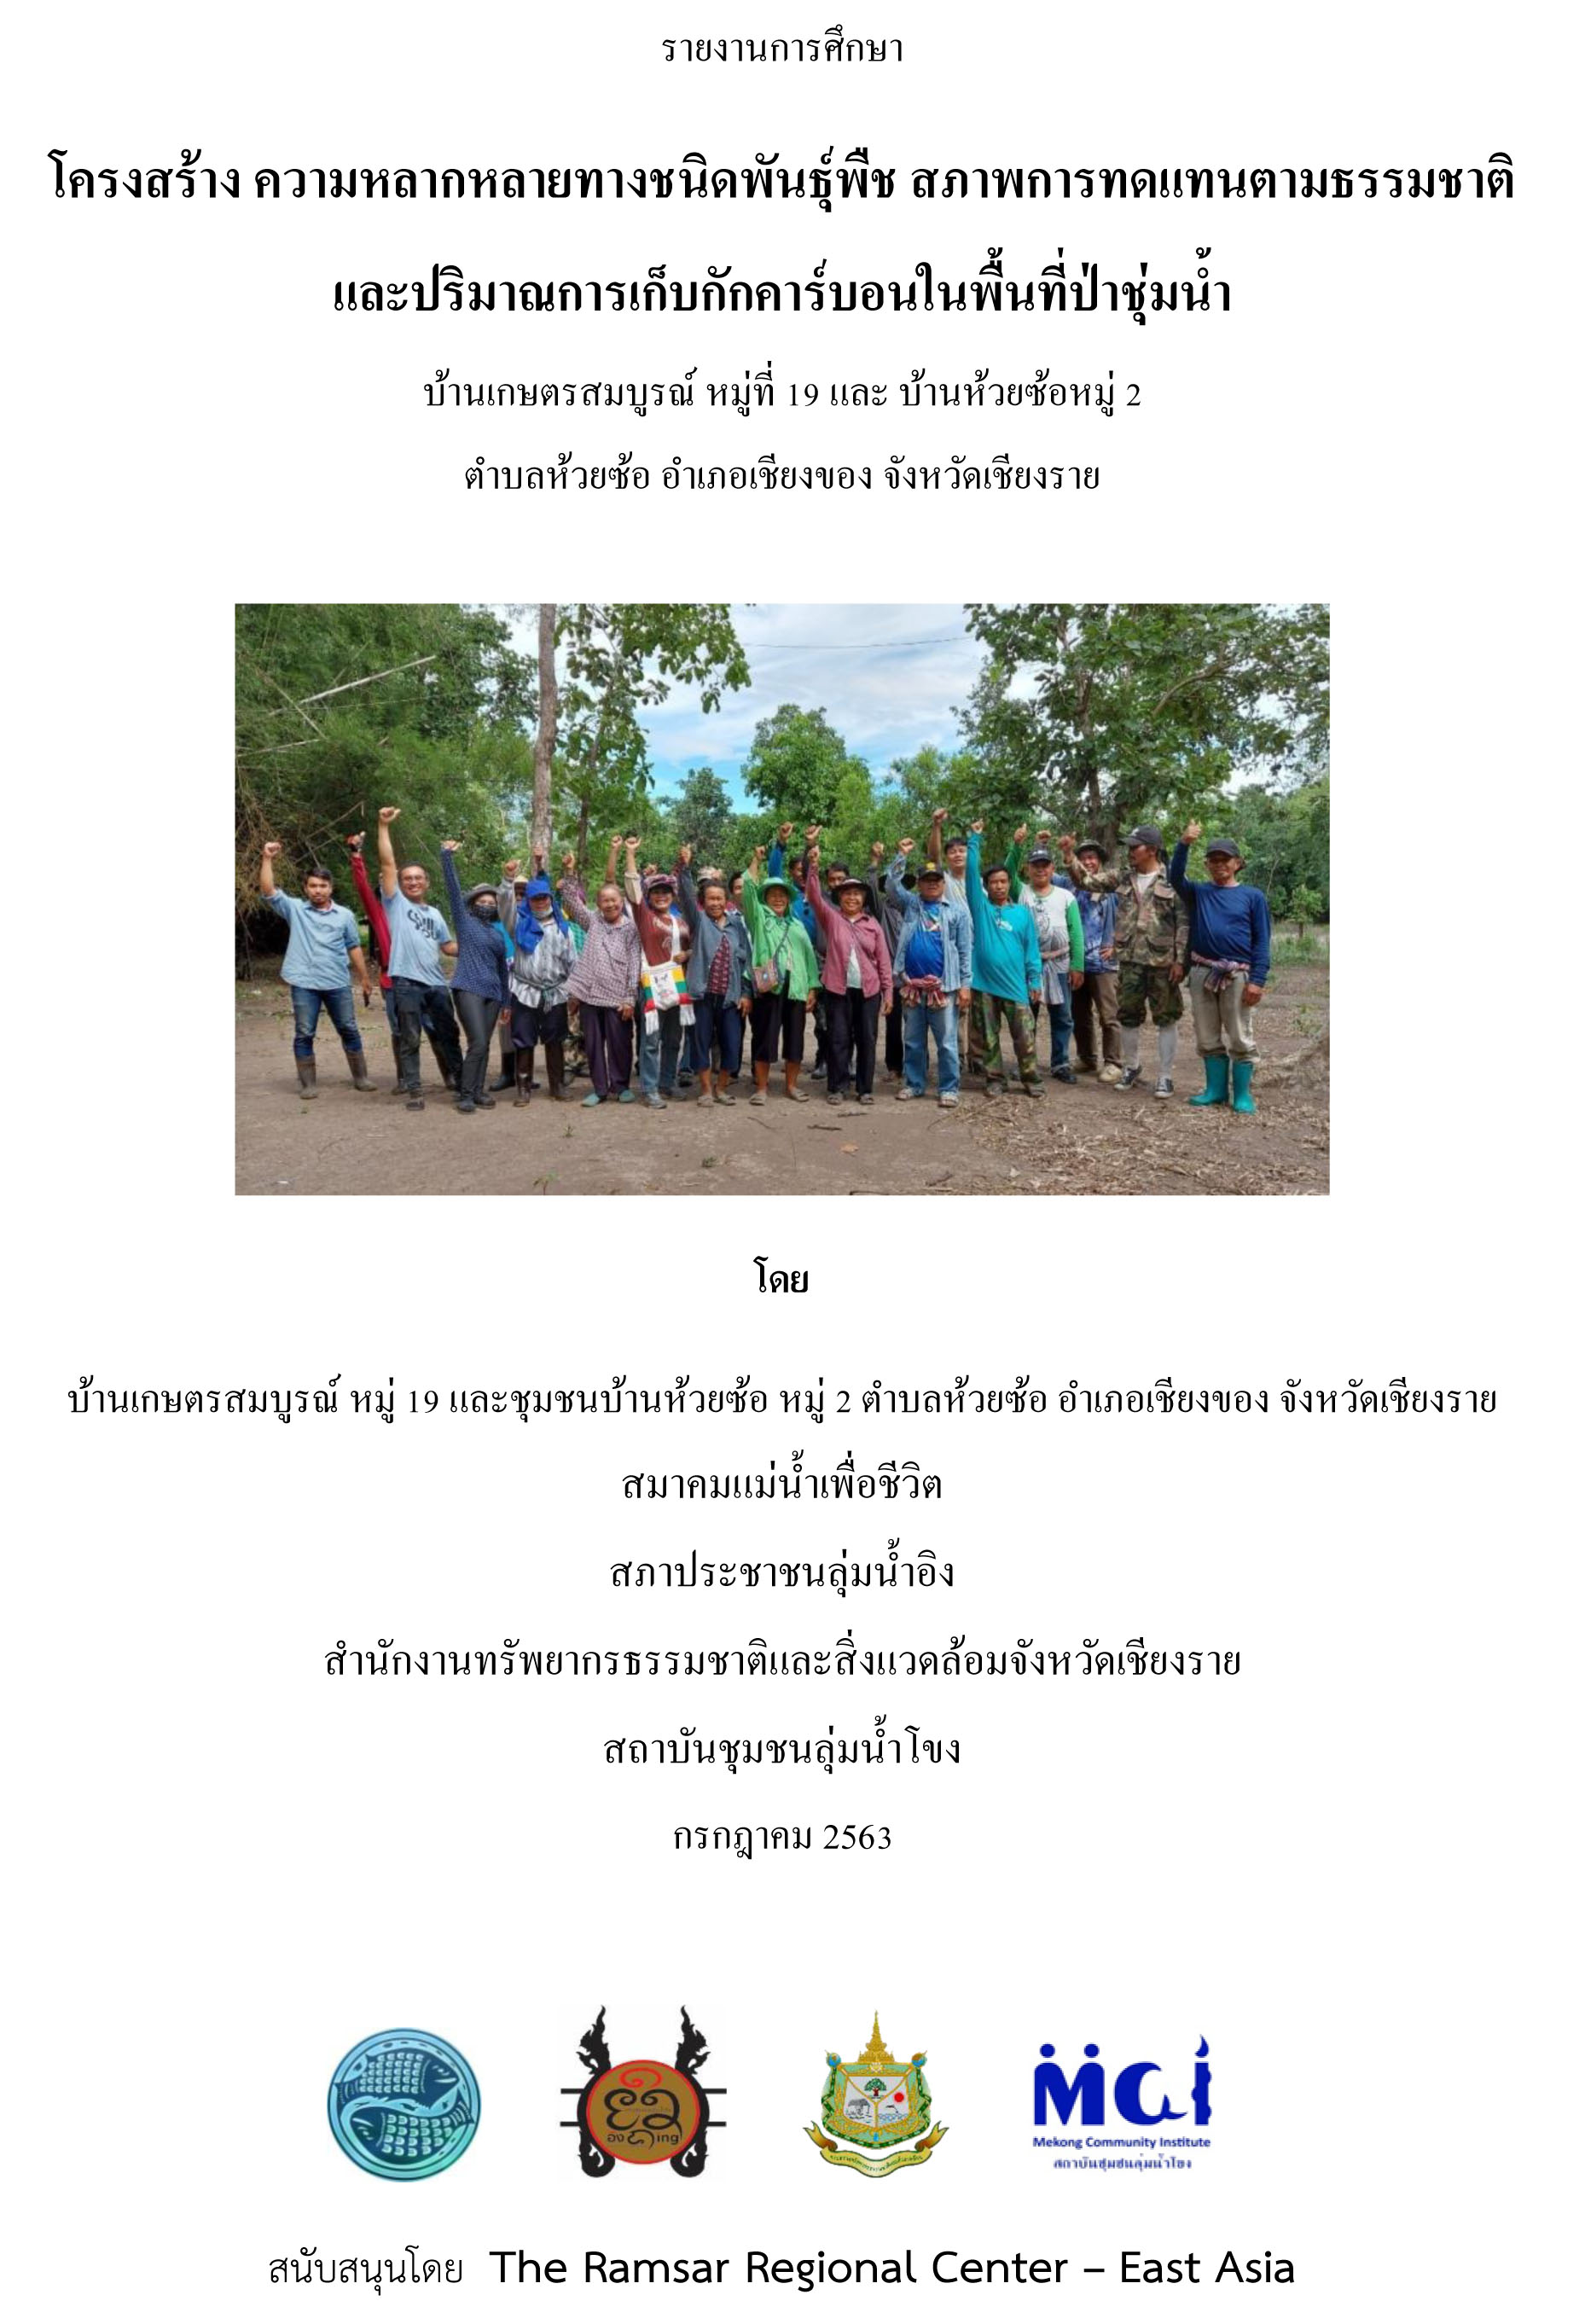 2563 07 08 Report on the structure of the forest at Ban Huai So Kaset Somboon